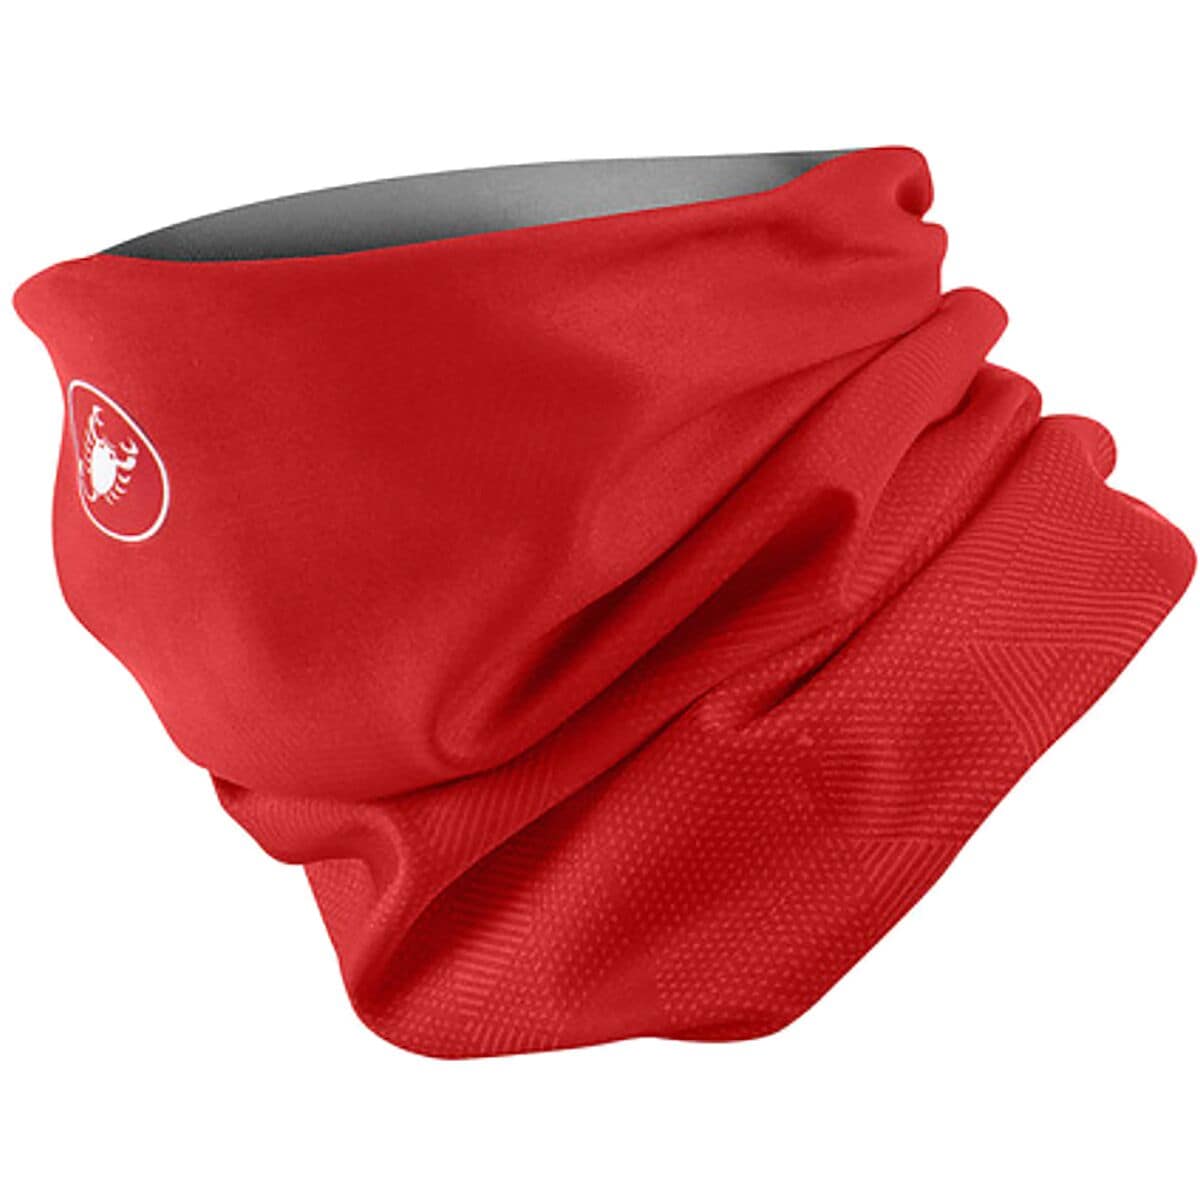 Castelli Pro Thermal Head Thingy Red, One Size